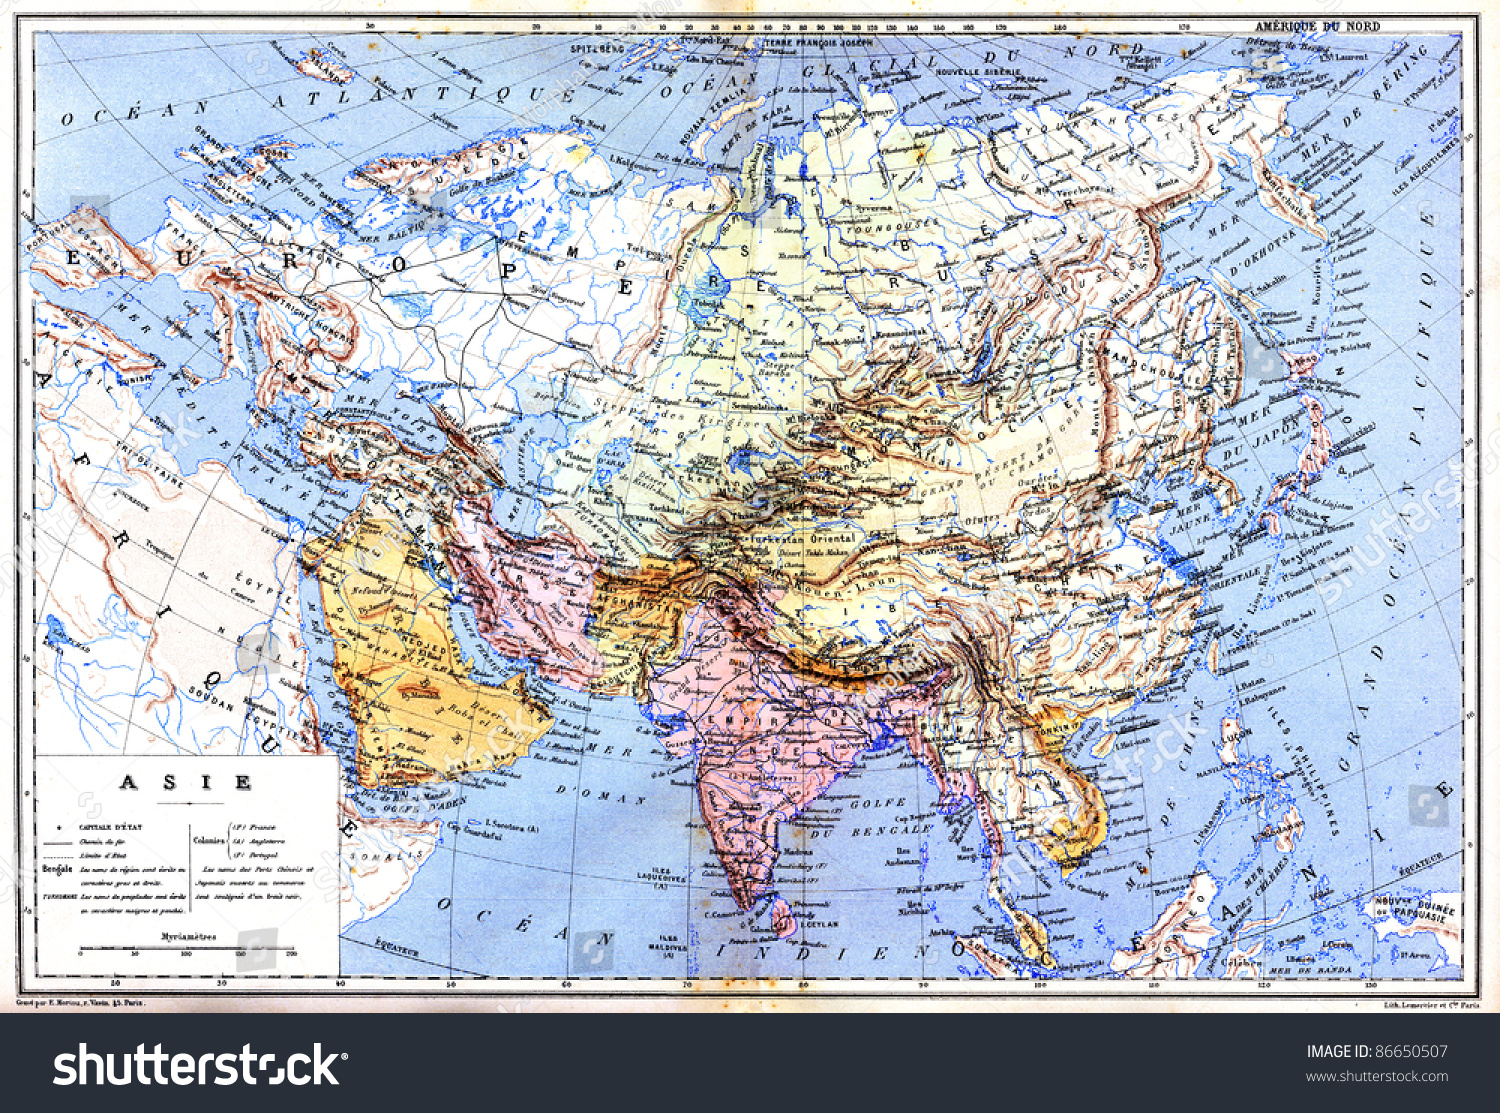 The Map Of Asia With Names Of Cities And Countries On Map From The Late ...